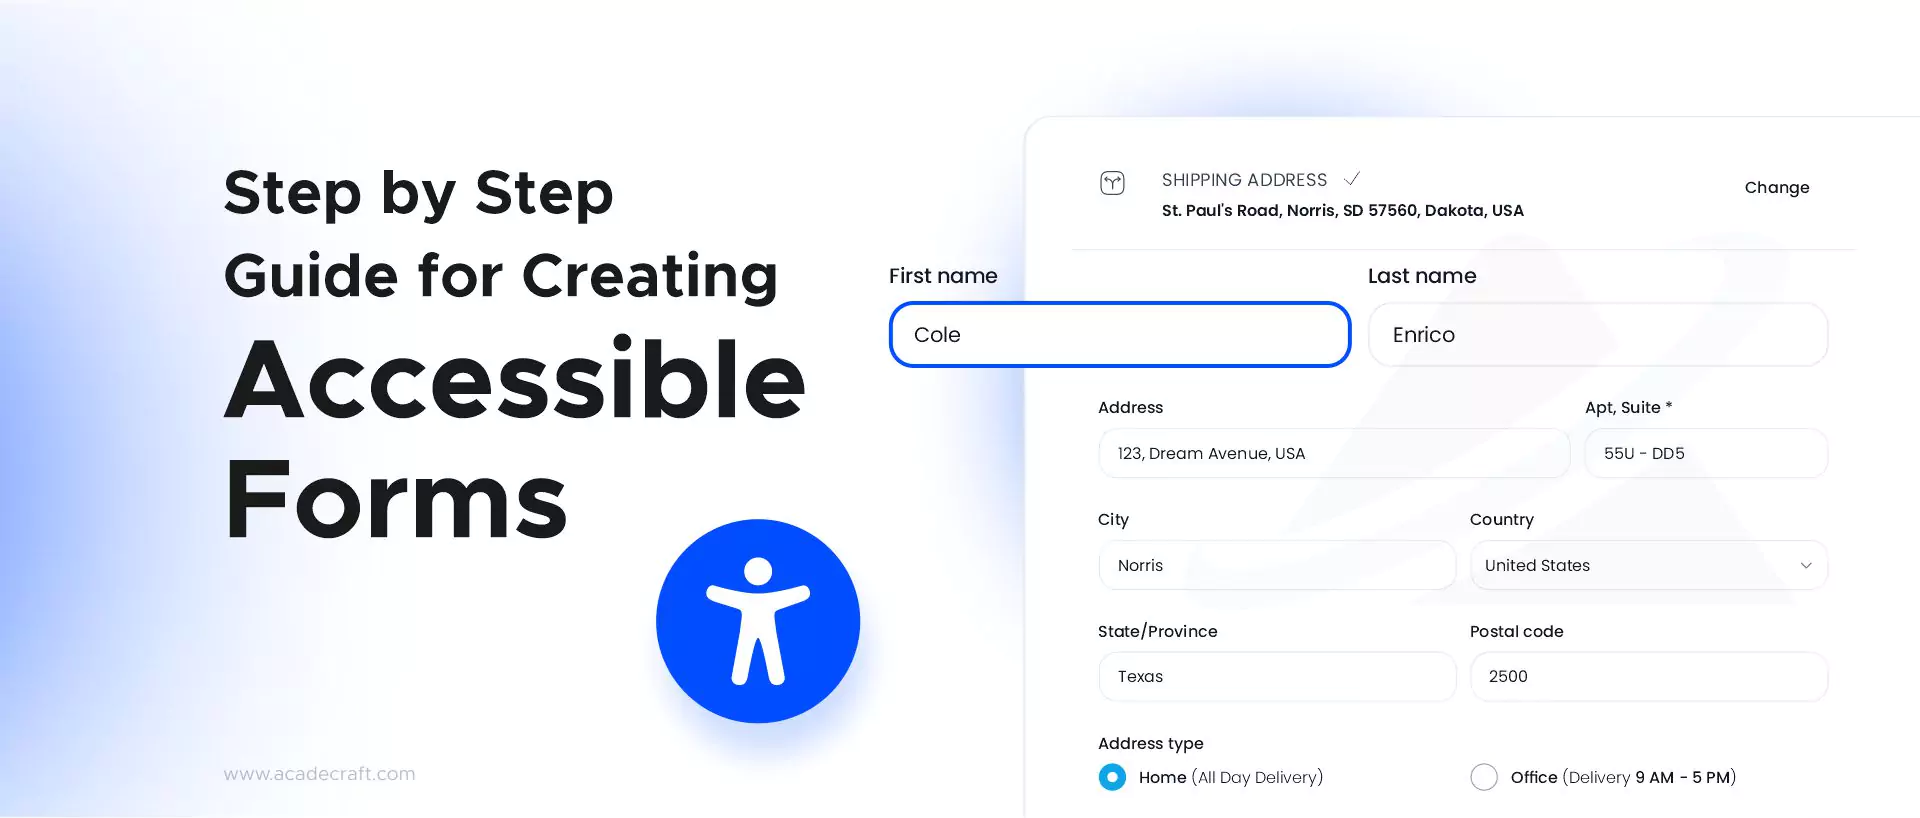 Step by Step Guide for Creating Accessible Forms